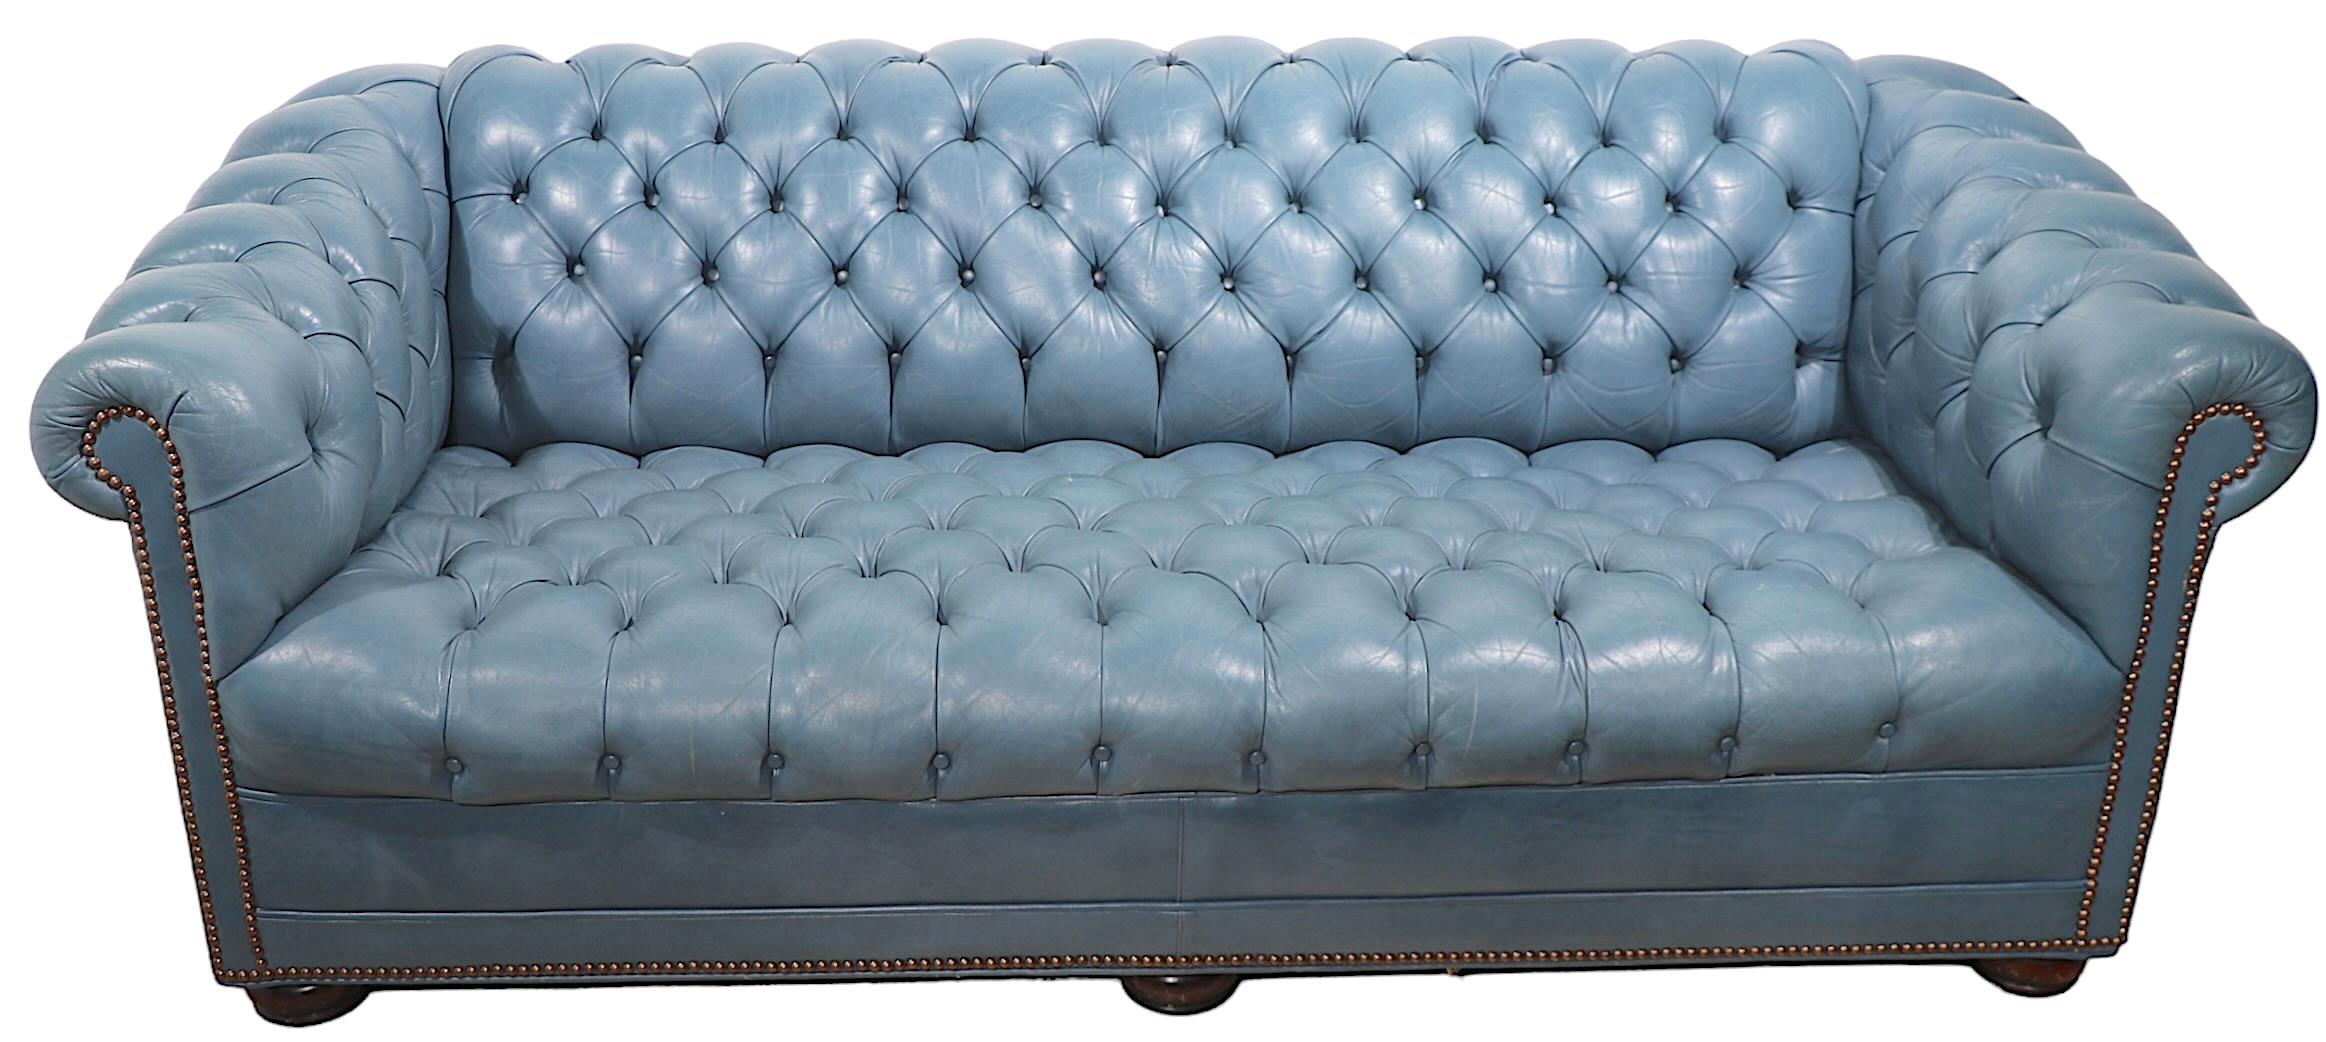 Tufted Leather Chesterfield in French  Blue Leather  13